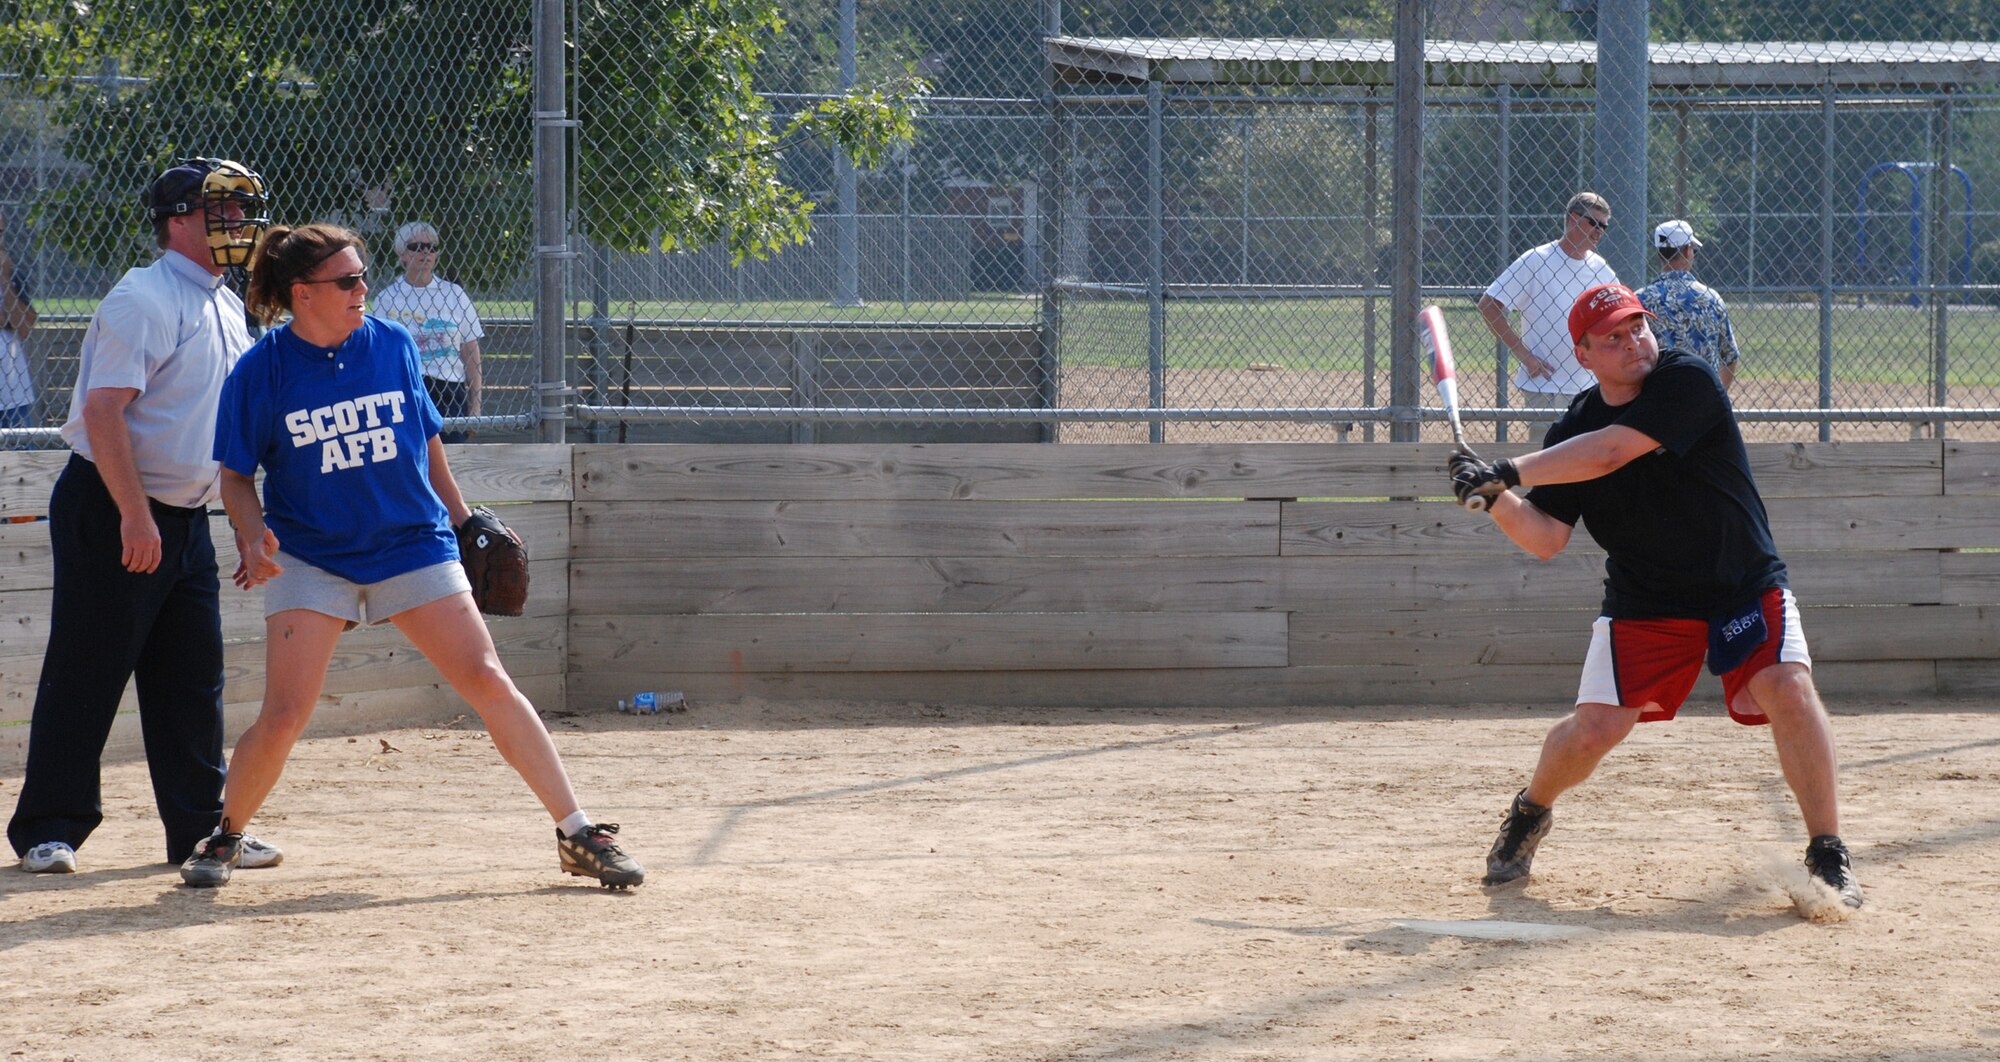 Hey there batter!  An officer of the 932nd Airlift Wing prepares to catch the first pitch at the recent softball match.